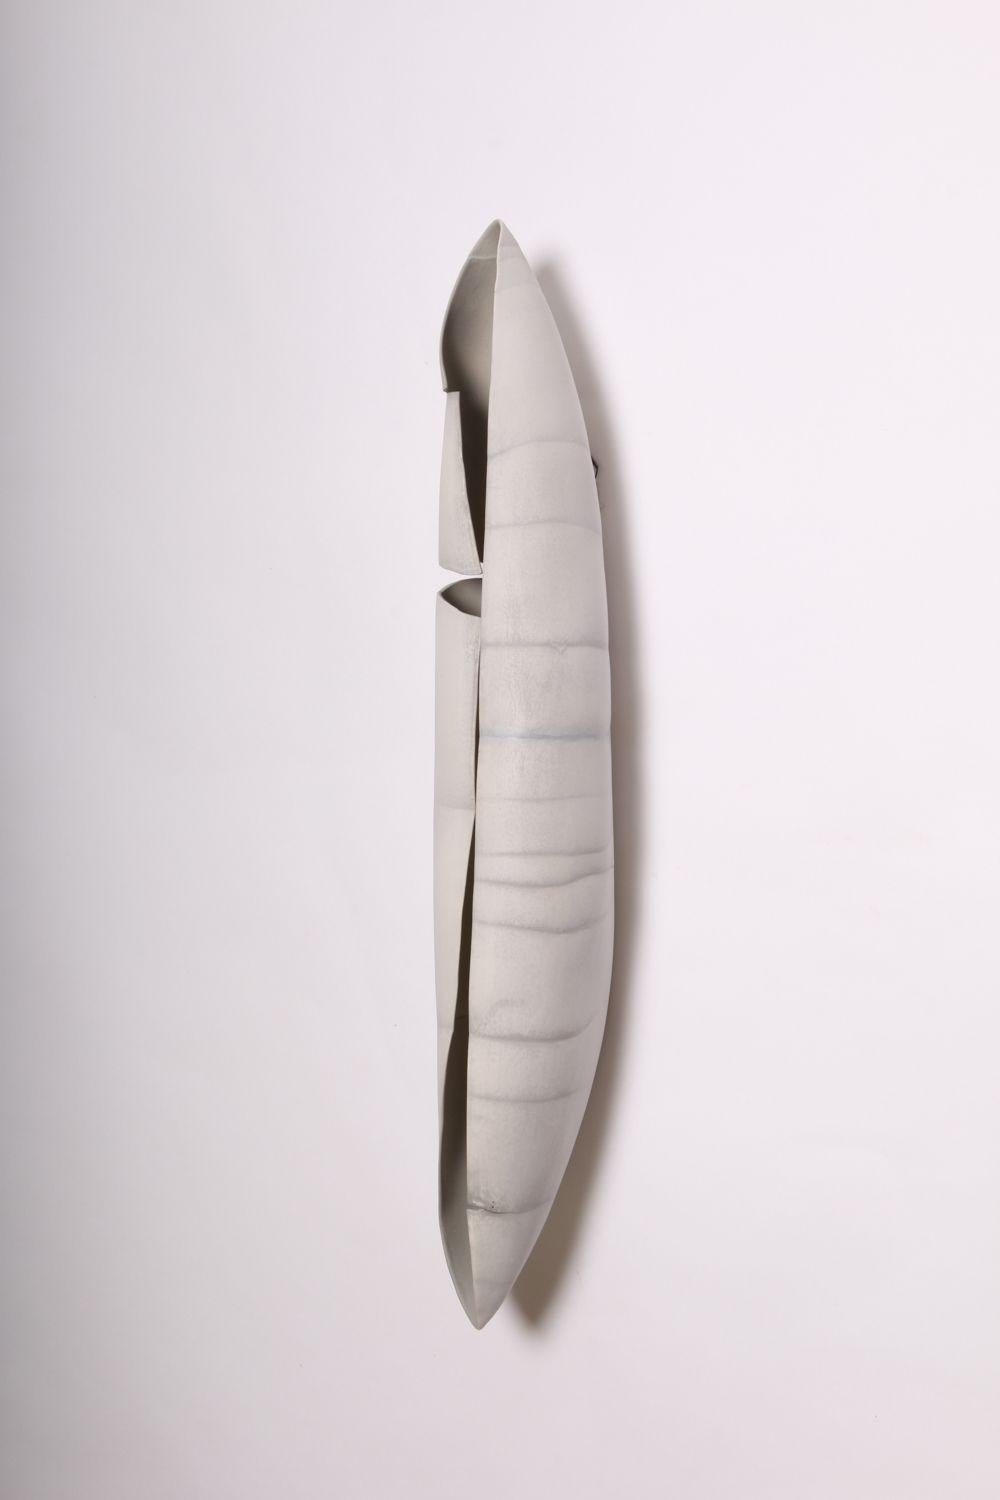 Contemporary Porcelain Wall Art / Hanging Vessel by Ceramic Artist, Paula Murray

Contemporary porcelain wall art called, 'Passages III', in the shape of a canoe, by world renowned ceramic artist, Paula Murray.
Transformation is at the heart of